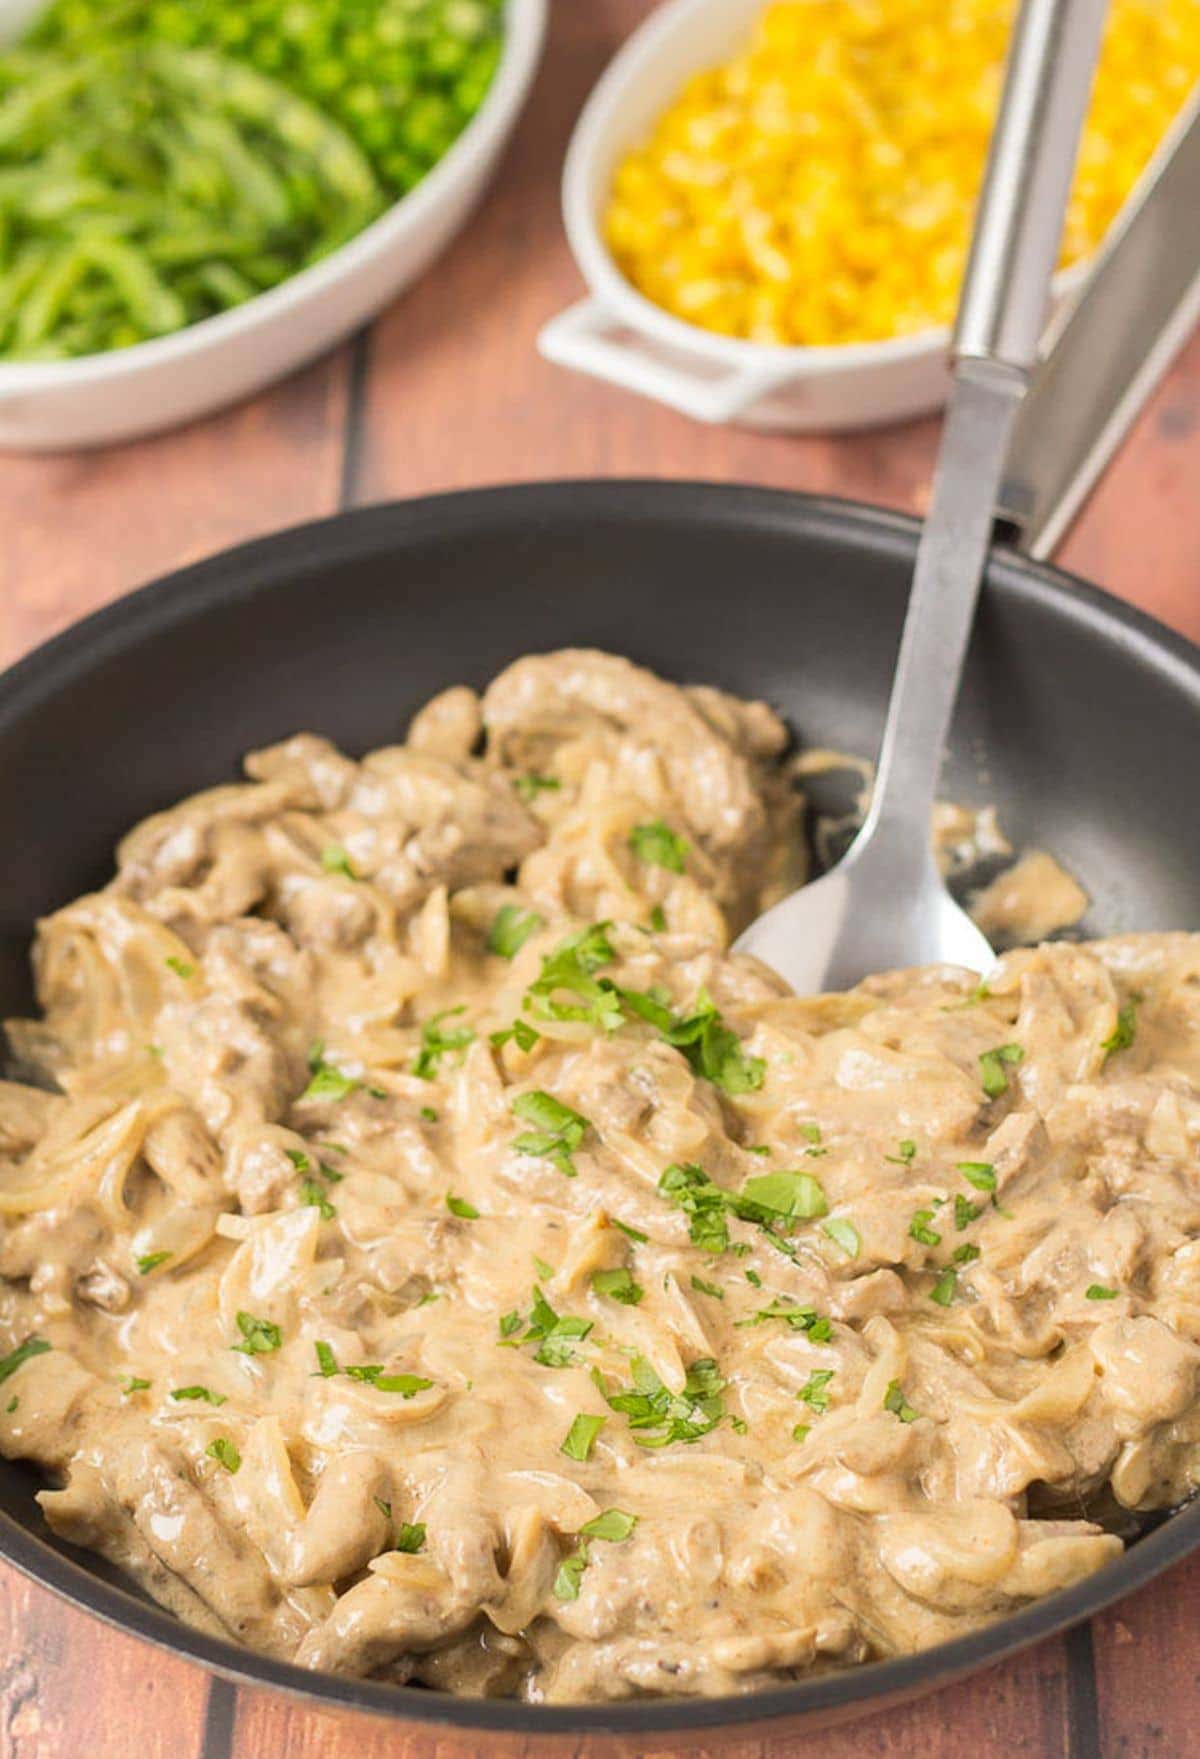 A pan of cooked quick healthy beef stroganoff with a serving spoon in. Side dishes of green beans and sweetcorn in the background.